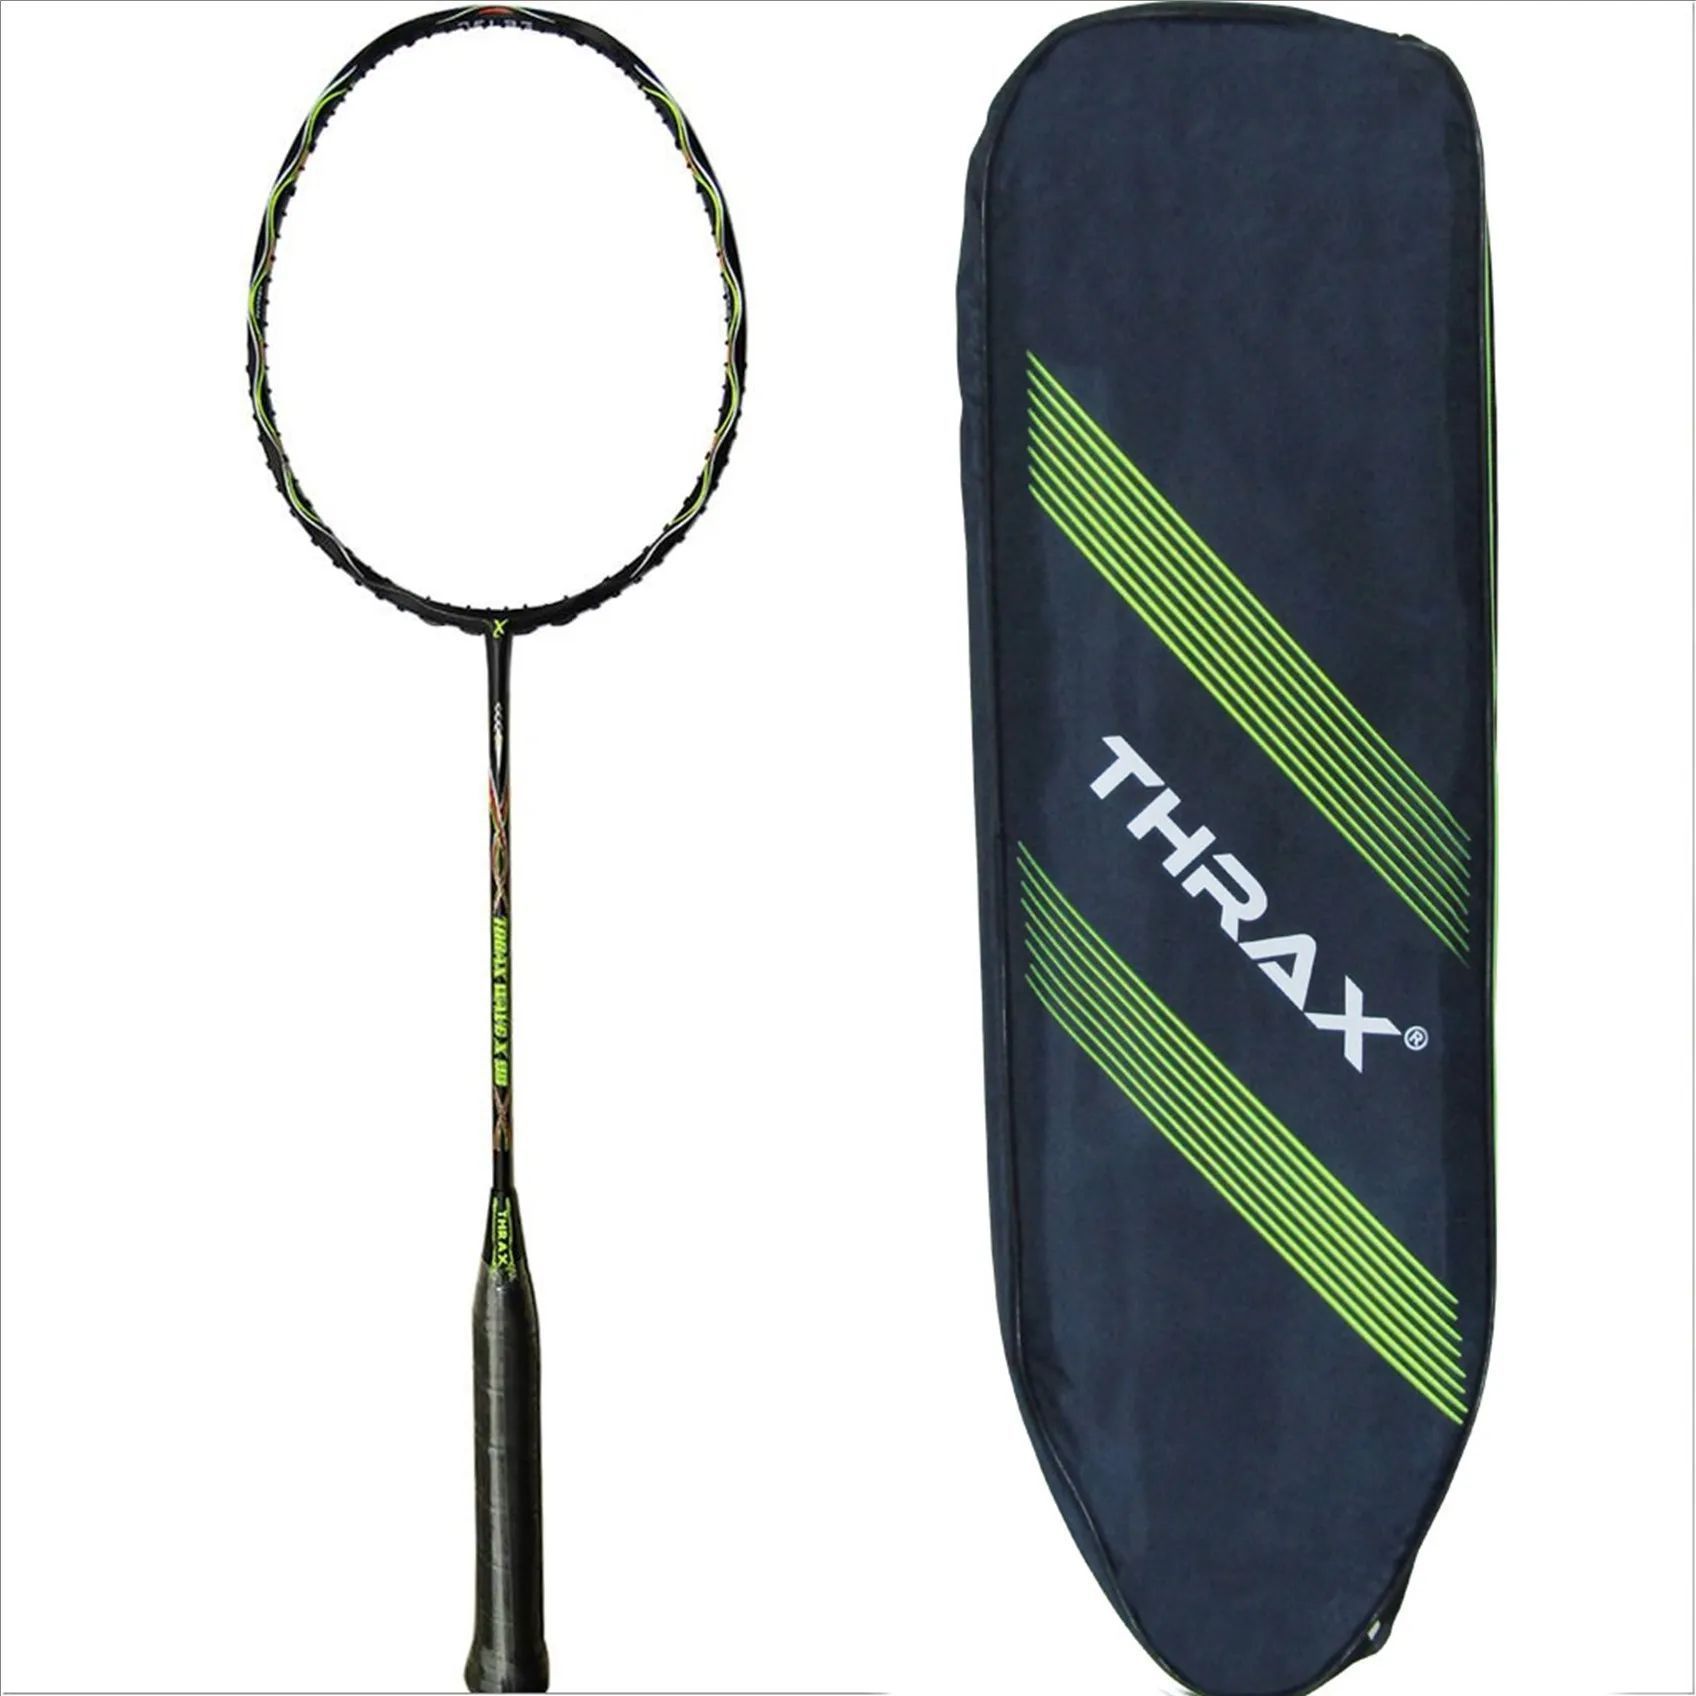 Buy Badminton Rackets Online India Badminton Rackets Lowest Prices and Reviews India khelmart